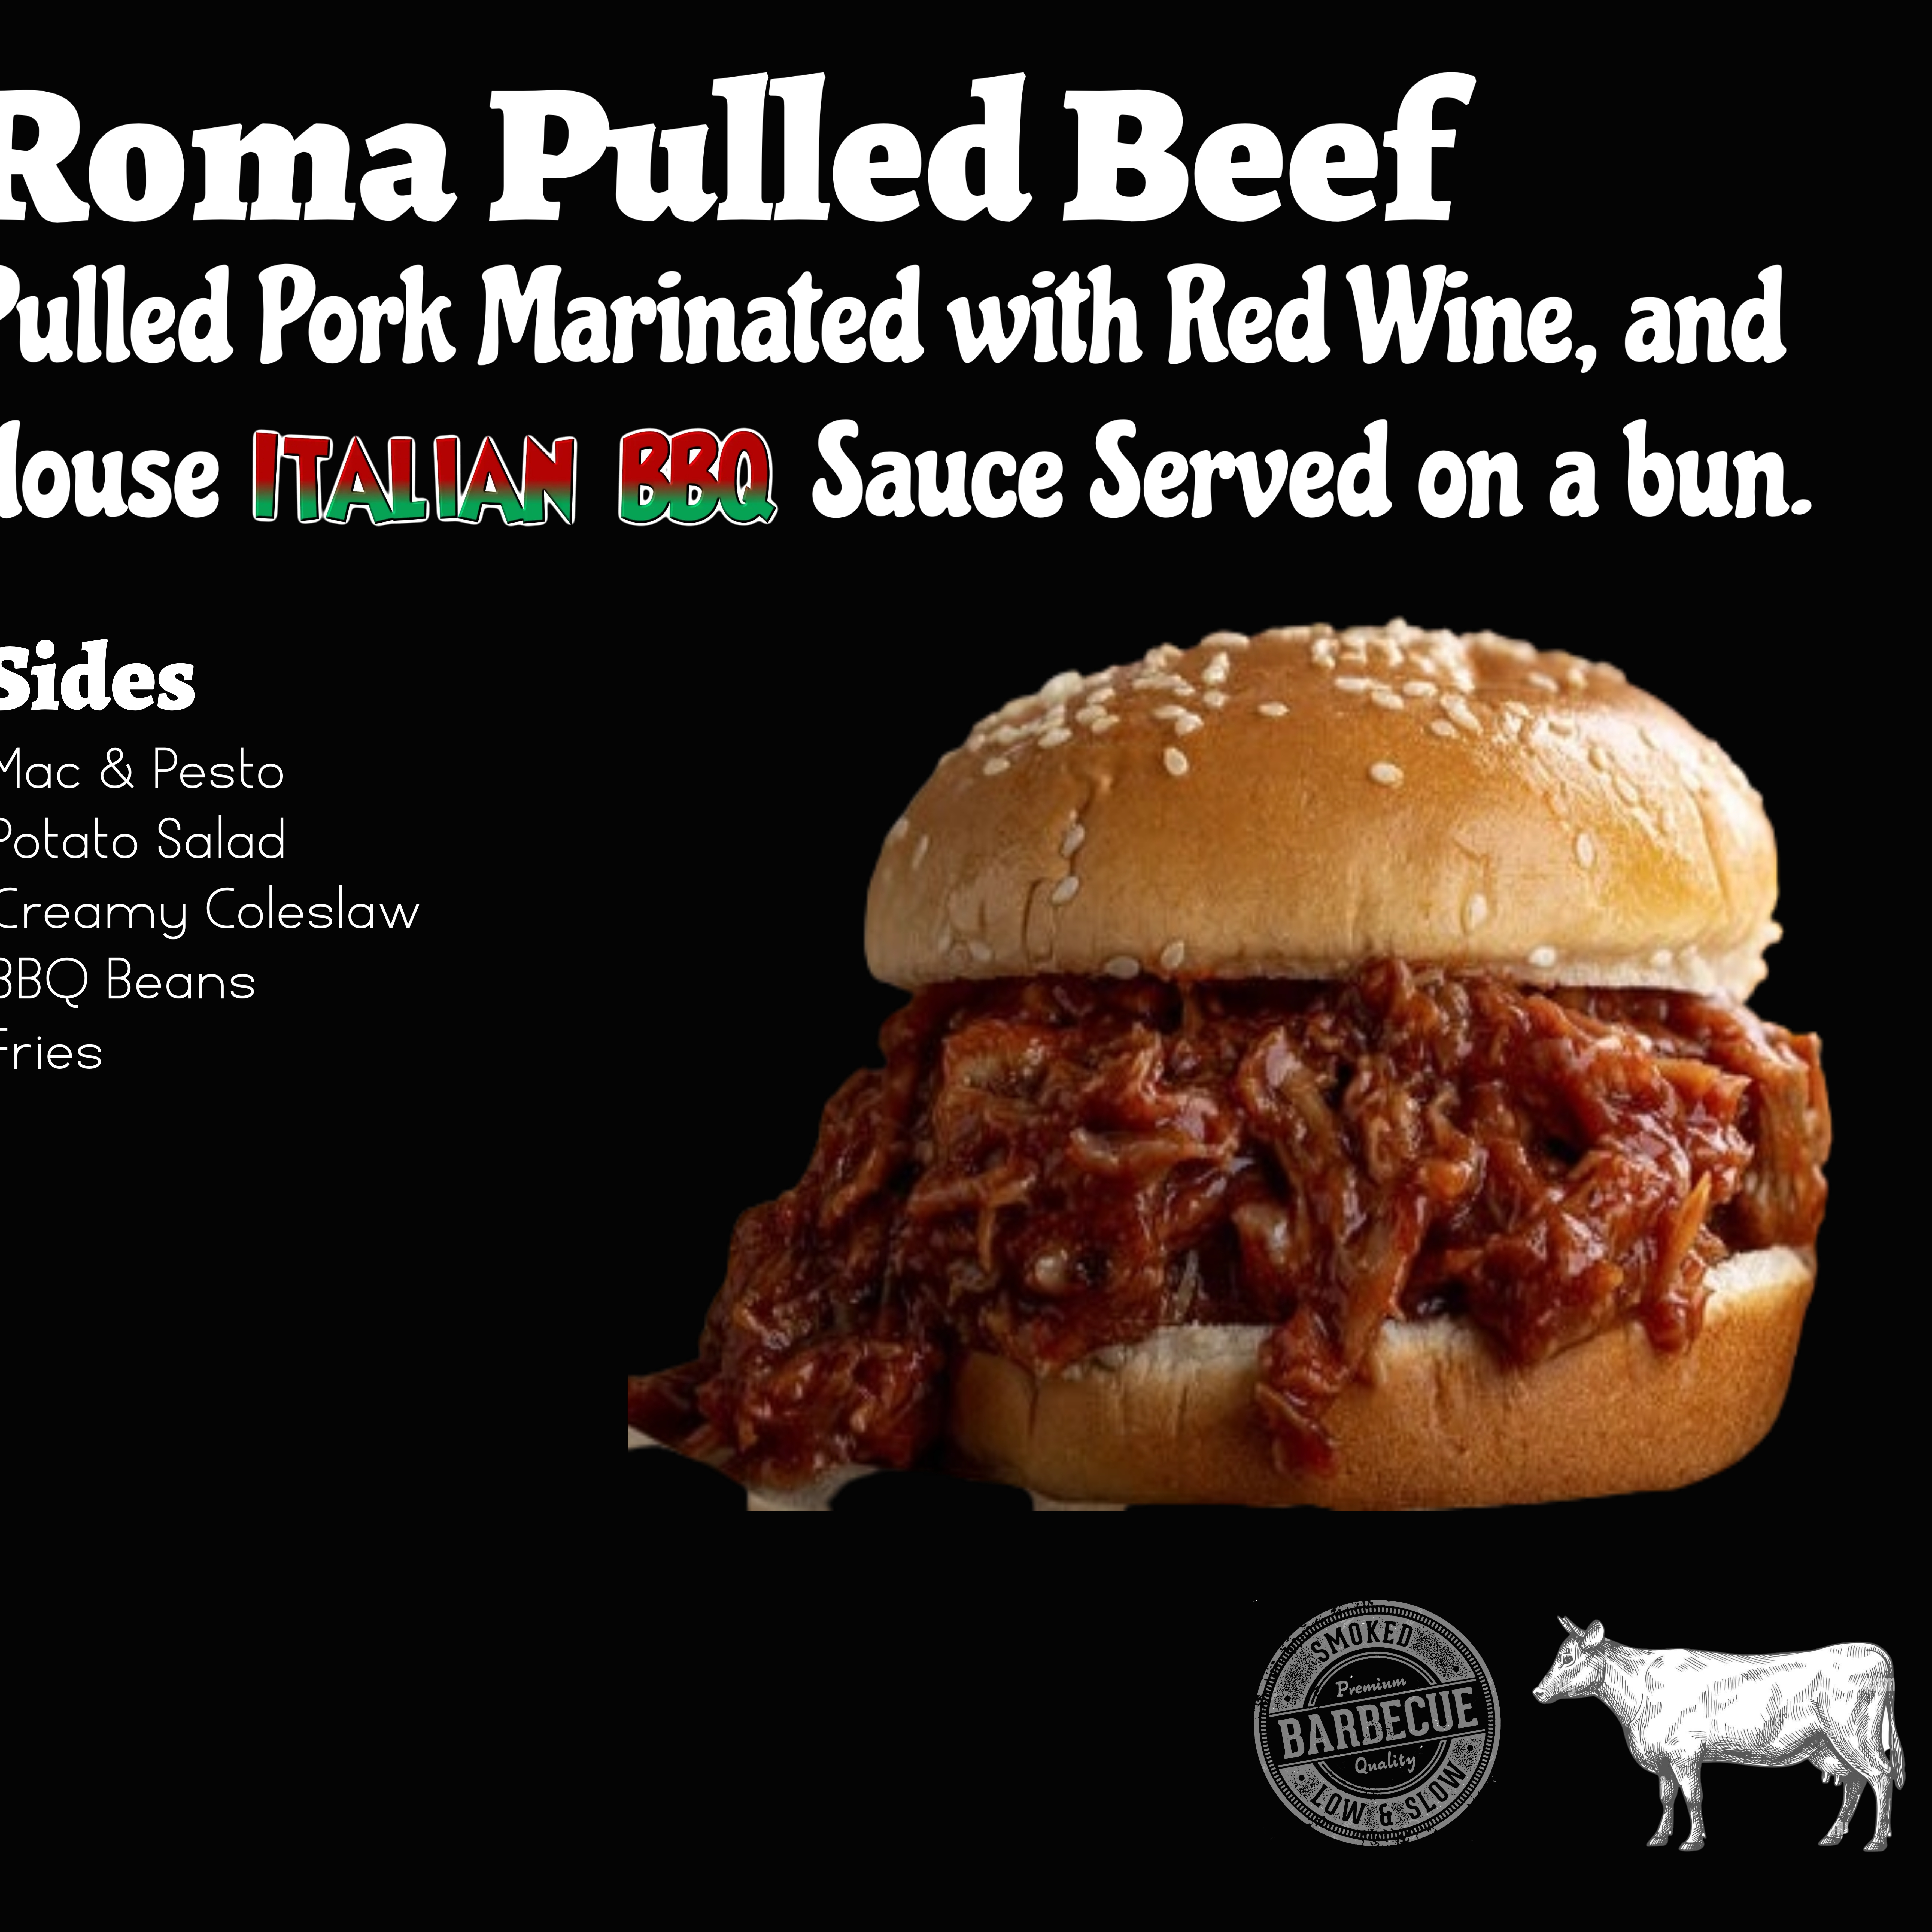 Roma pulled beef 